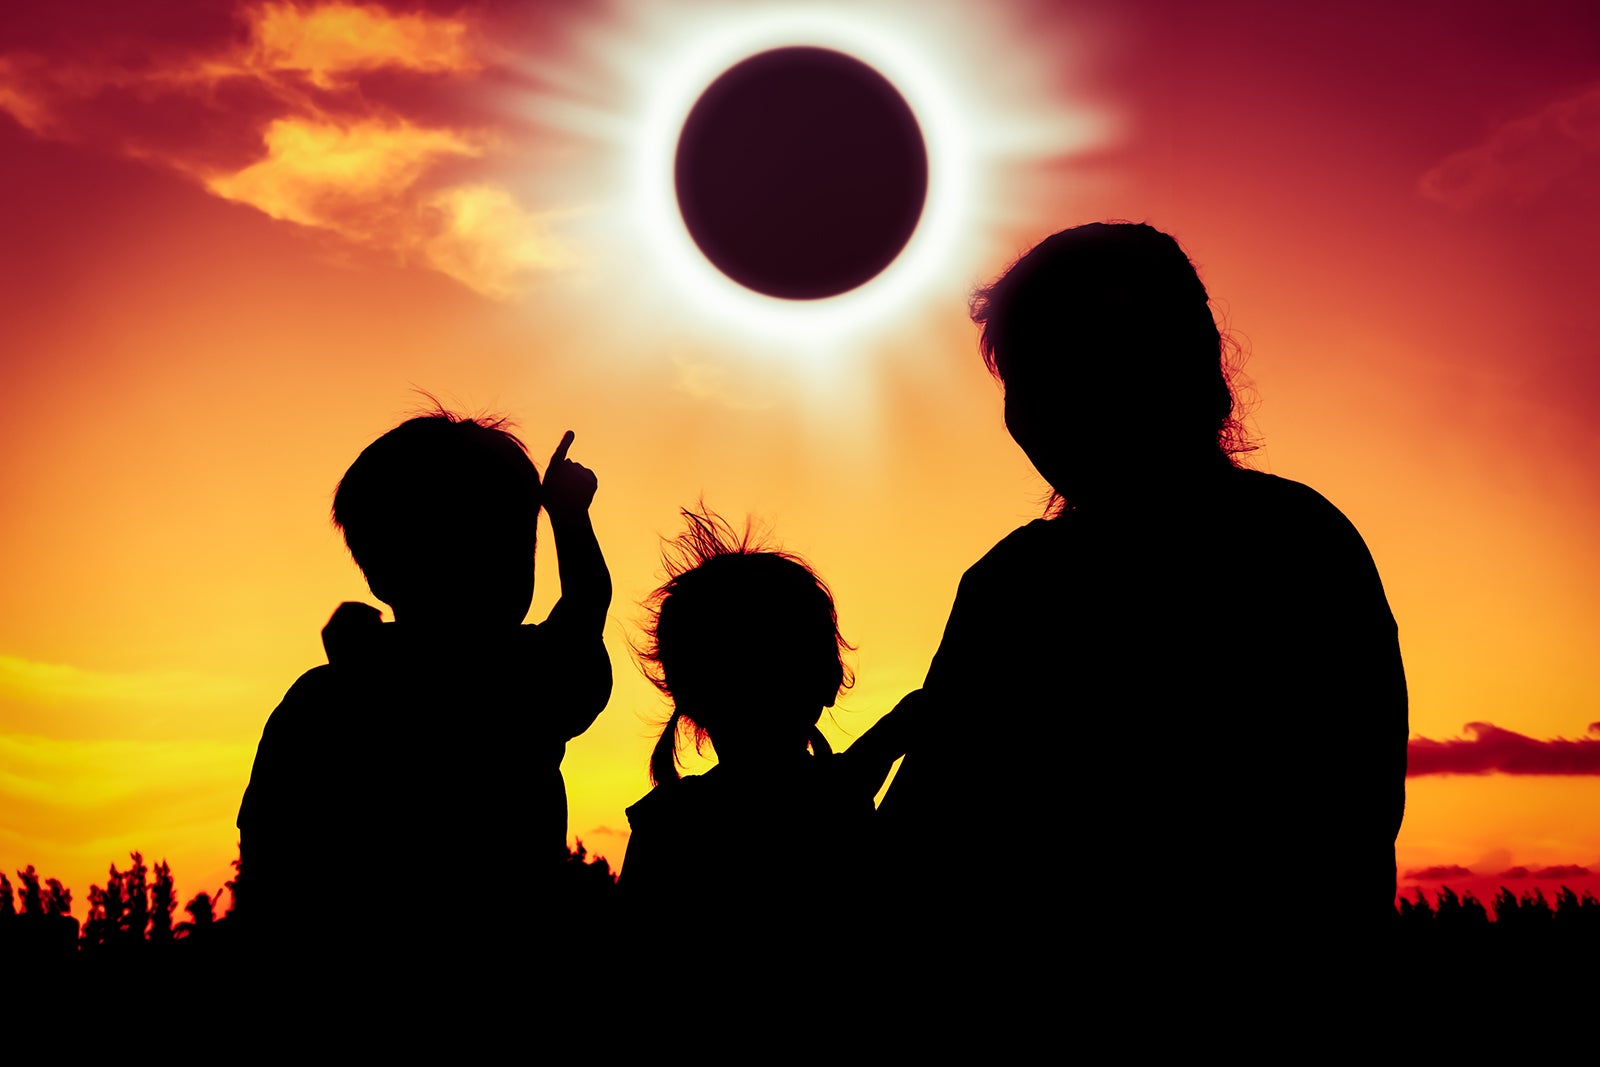 Things to do now if you want to watch the 2024 solar eclipse in April